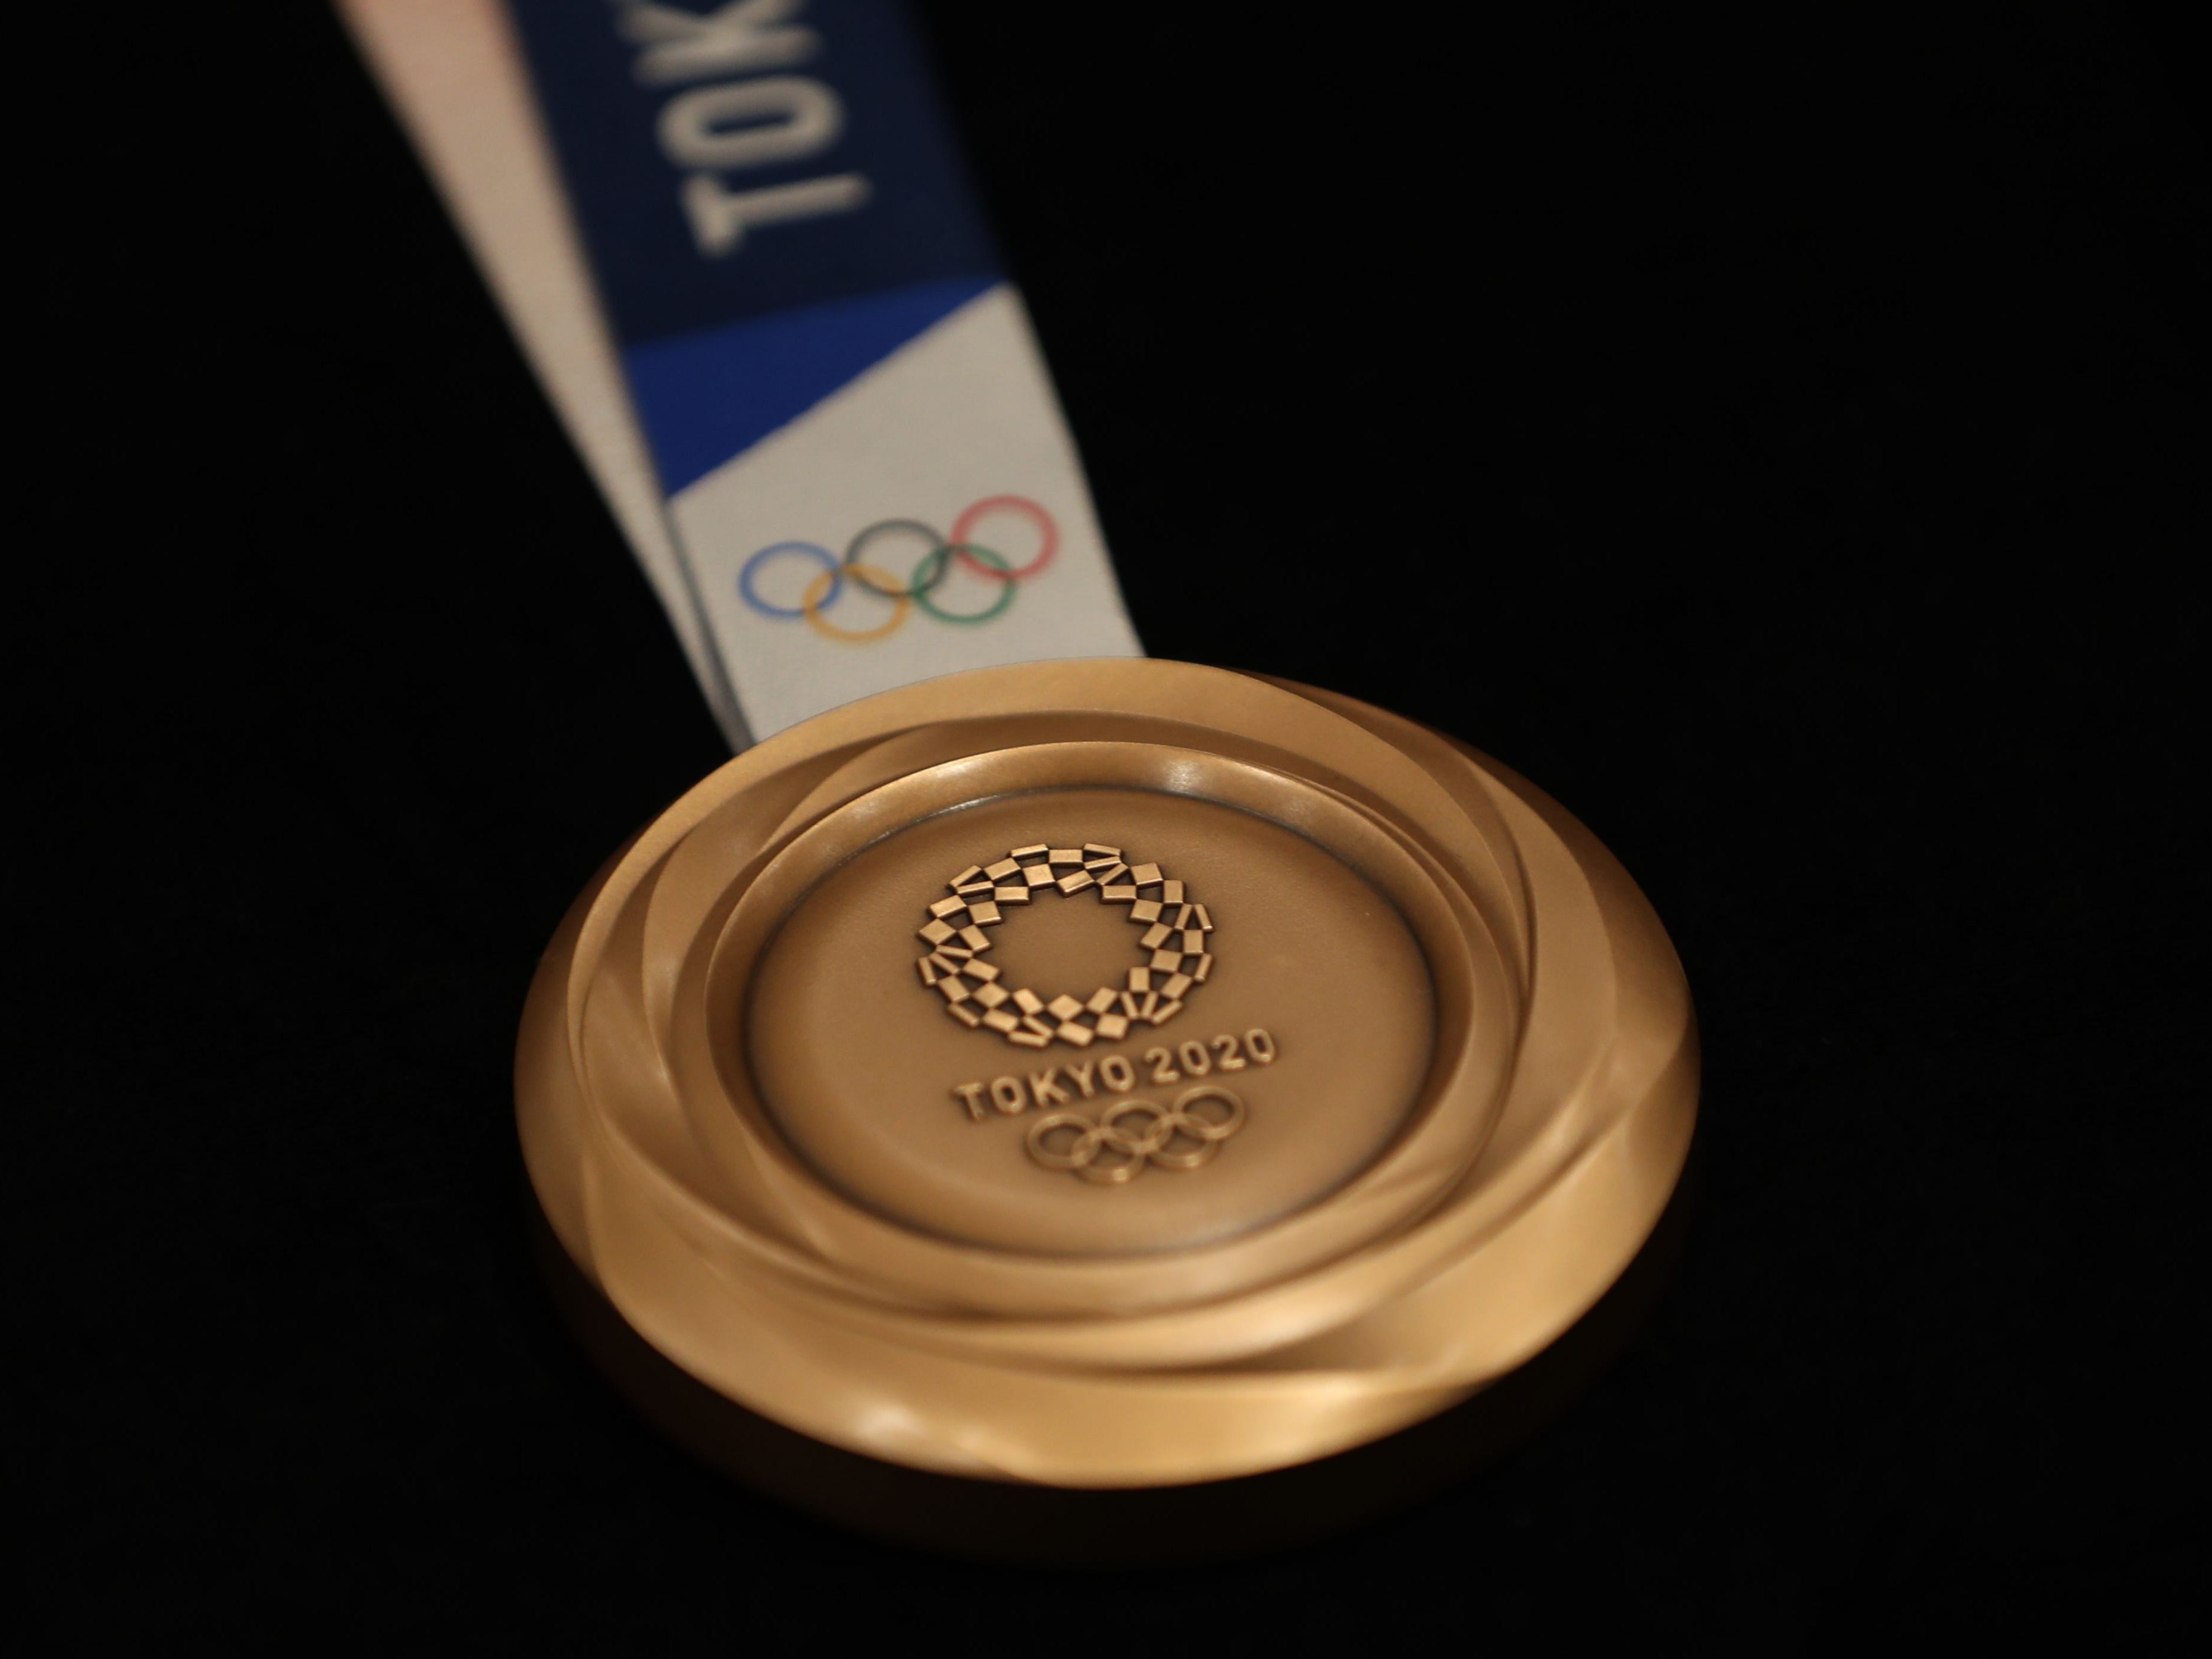 Another view of the bronze medal for the Tokyo 2020 Summer Olympics.